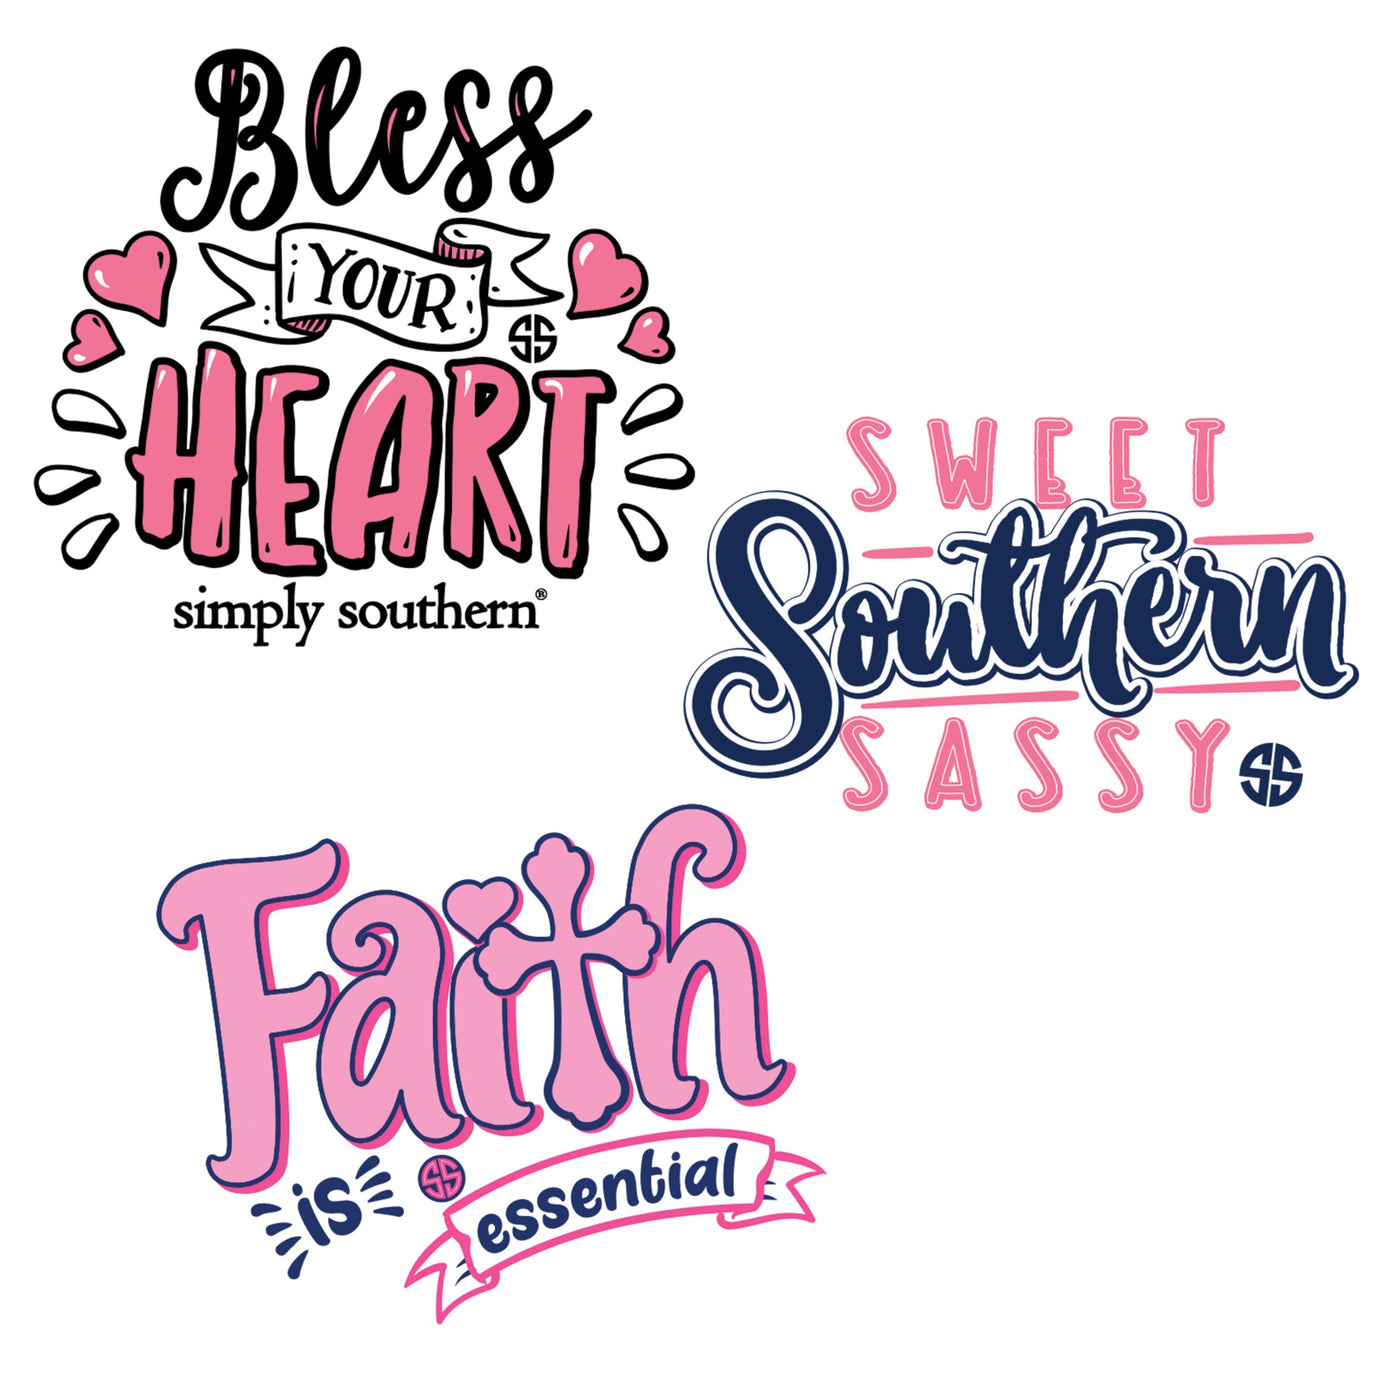 Simply Southern Spring 2021 Stickers (3 Pack)